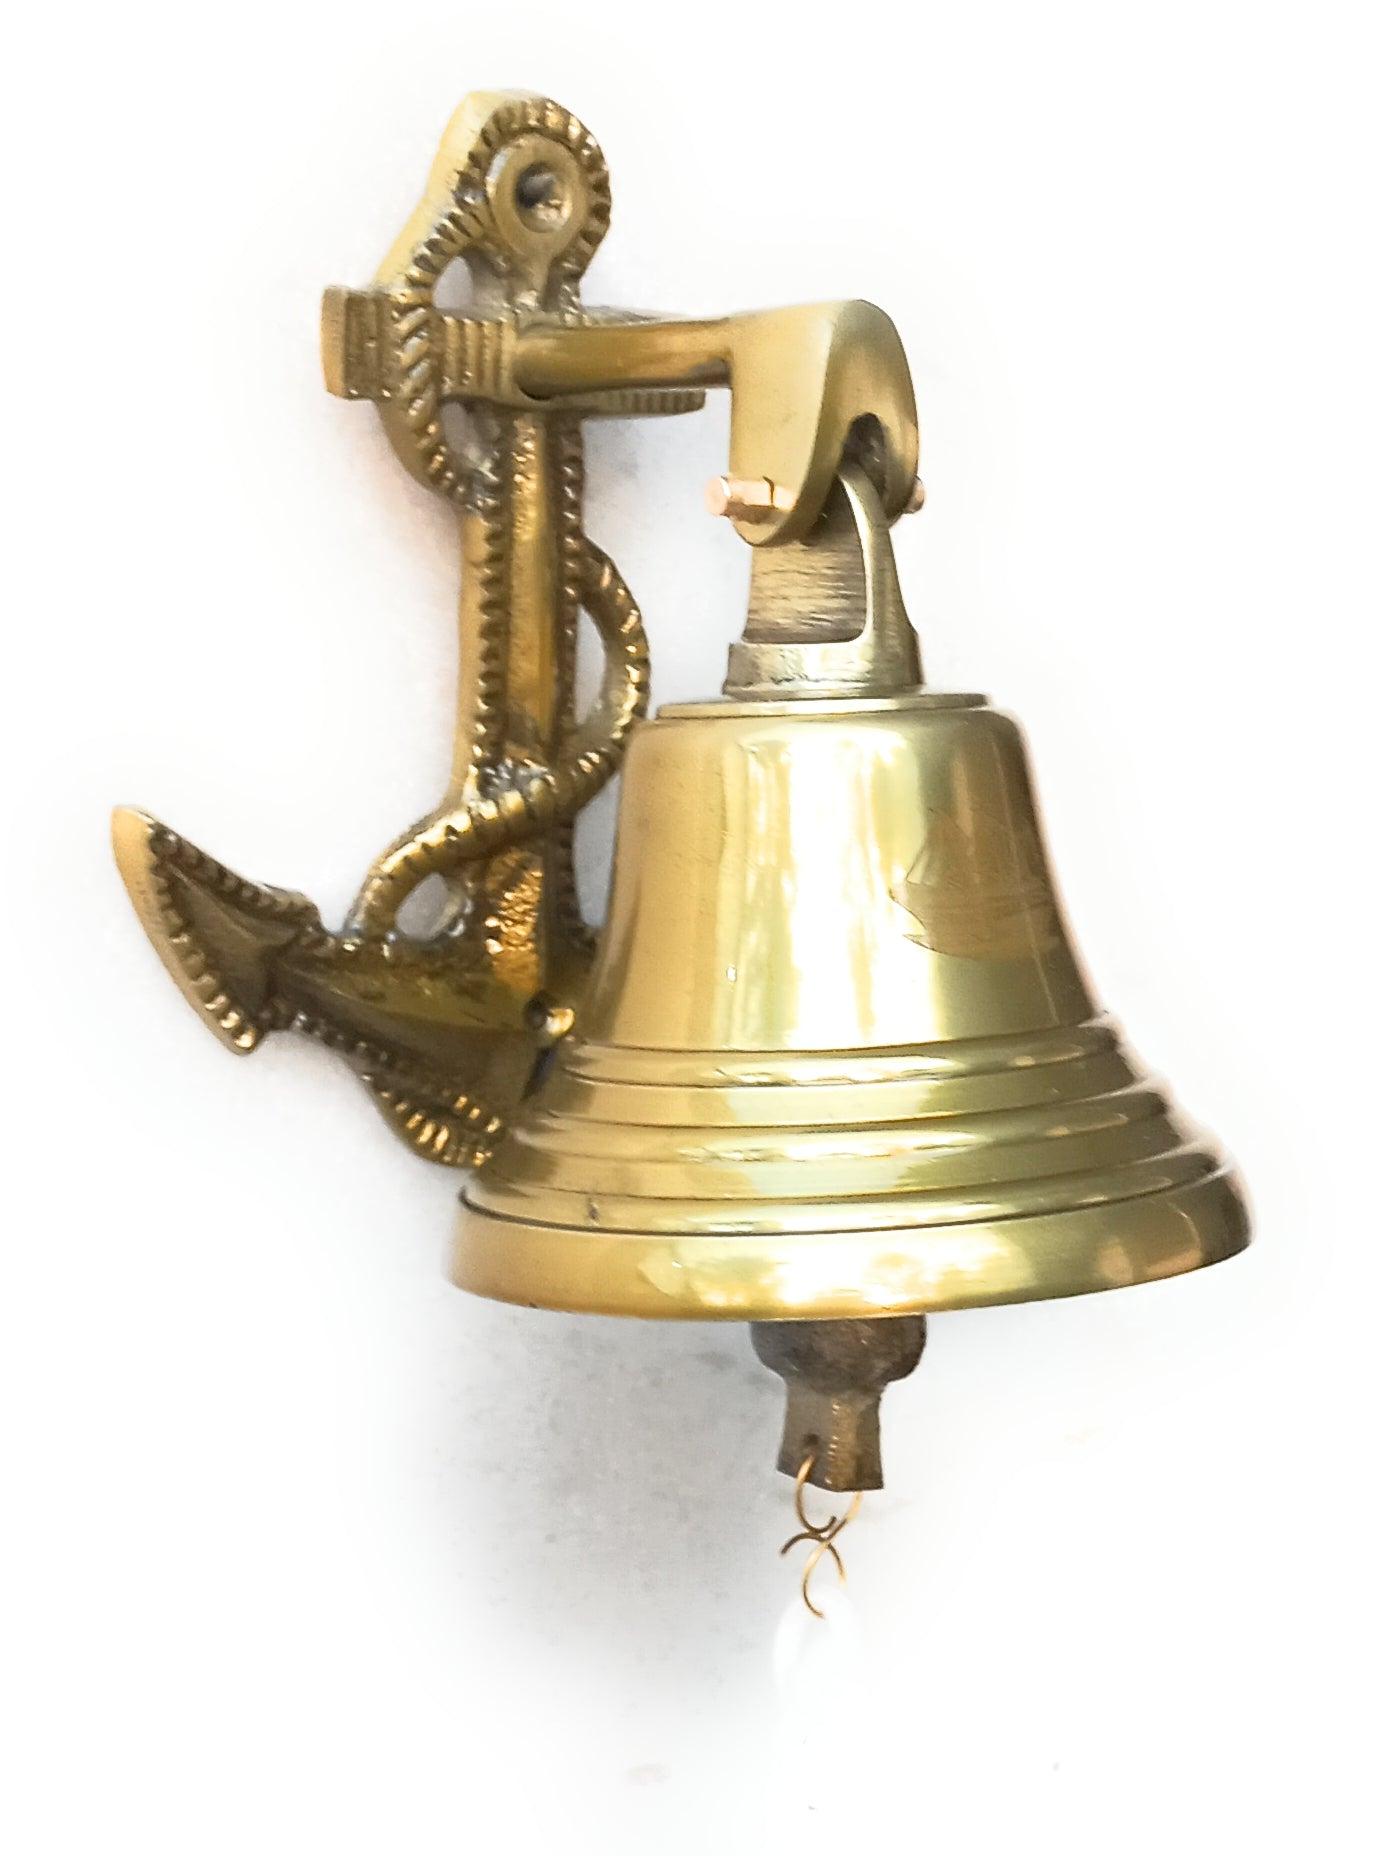 Used Antique Ships Bells and Boat Bells